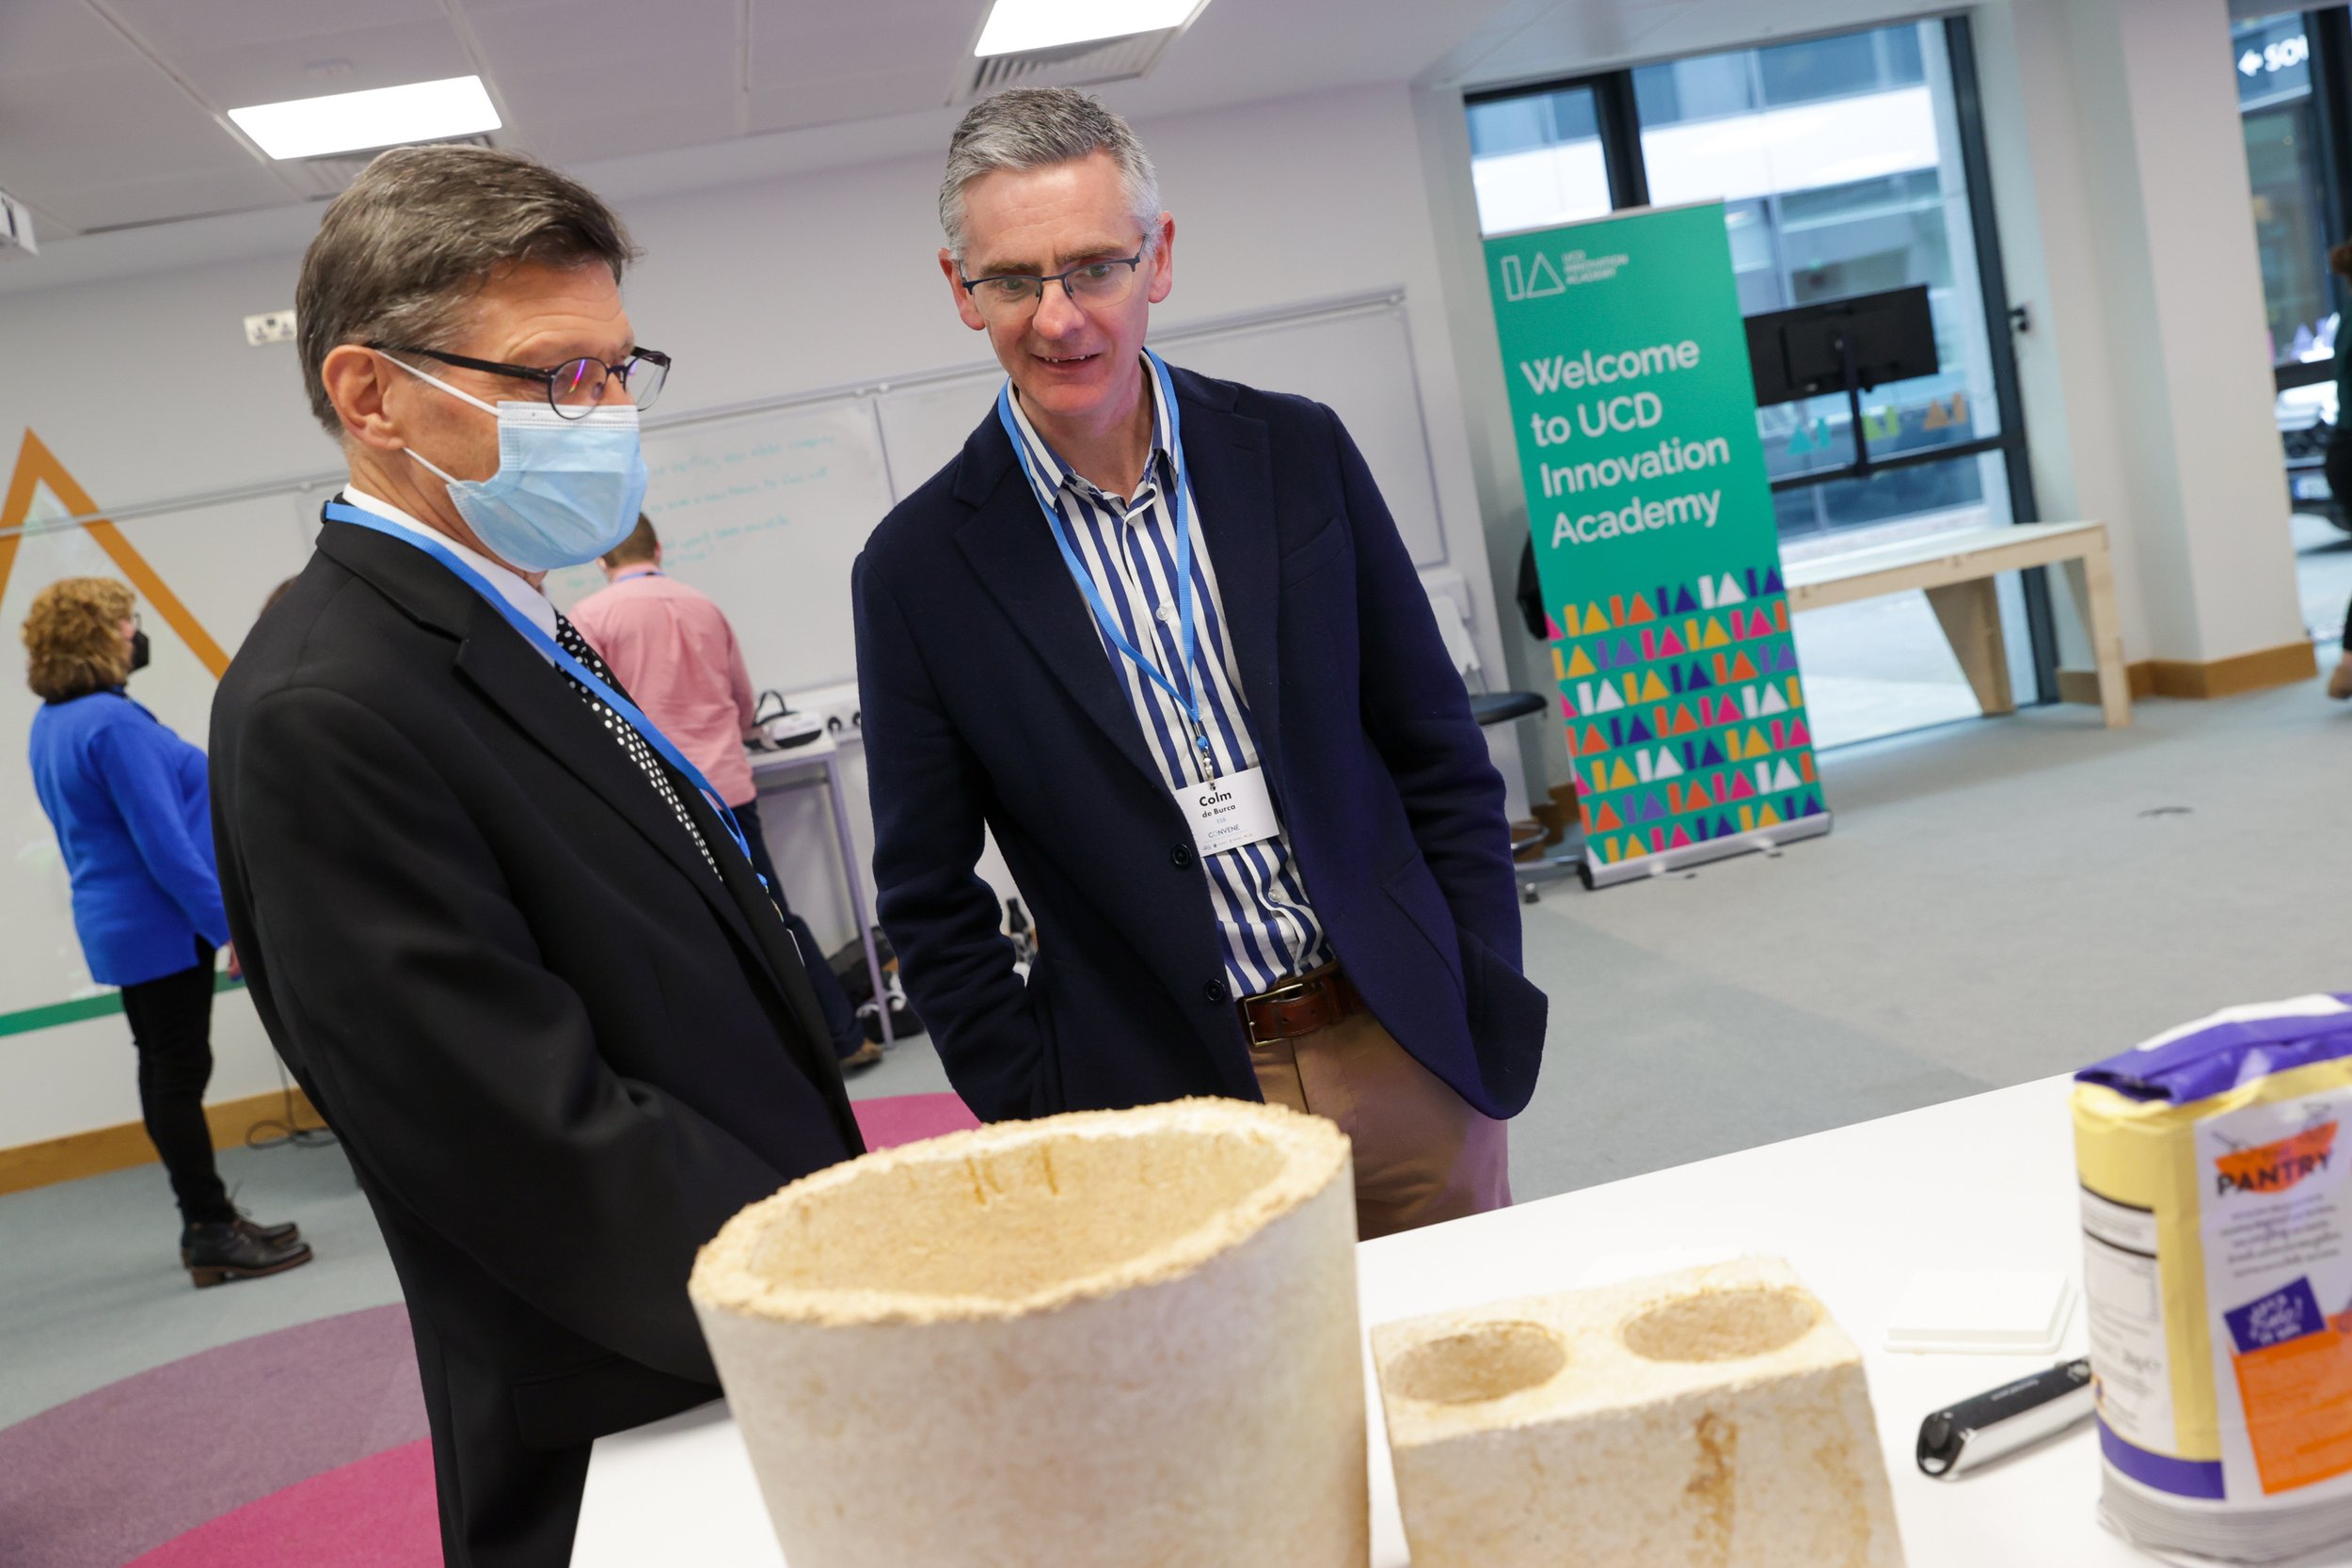  Thomas Macango, Education Innovation Lead at UCD Innovation Academy discusses the MakerSpace mycelium project with Colm de Burca from the ESB. 